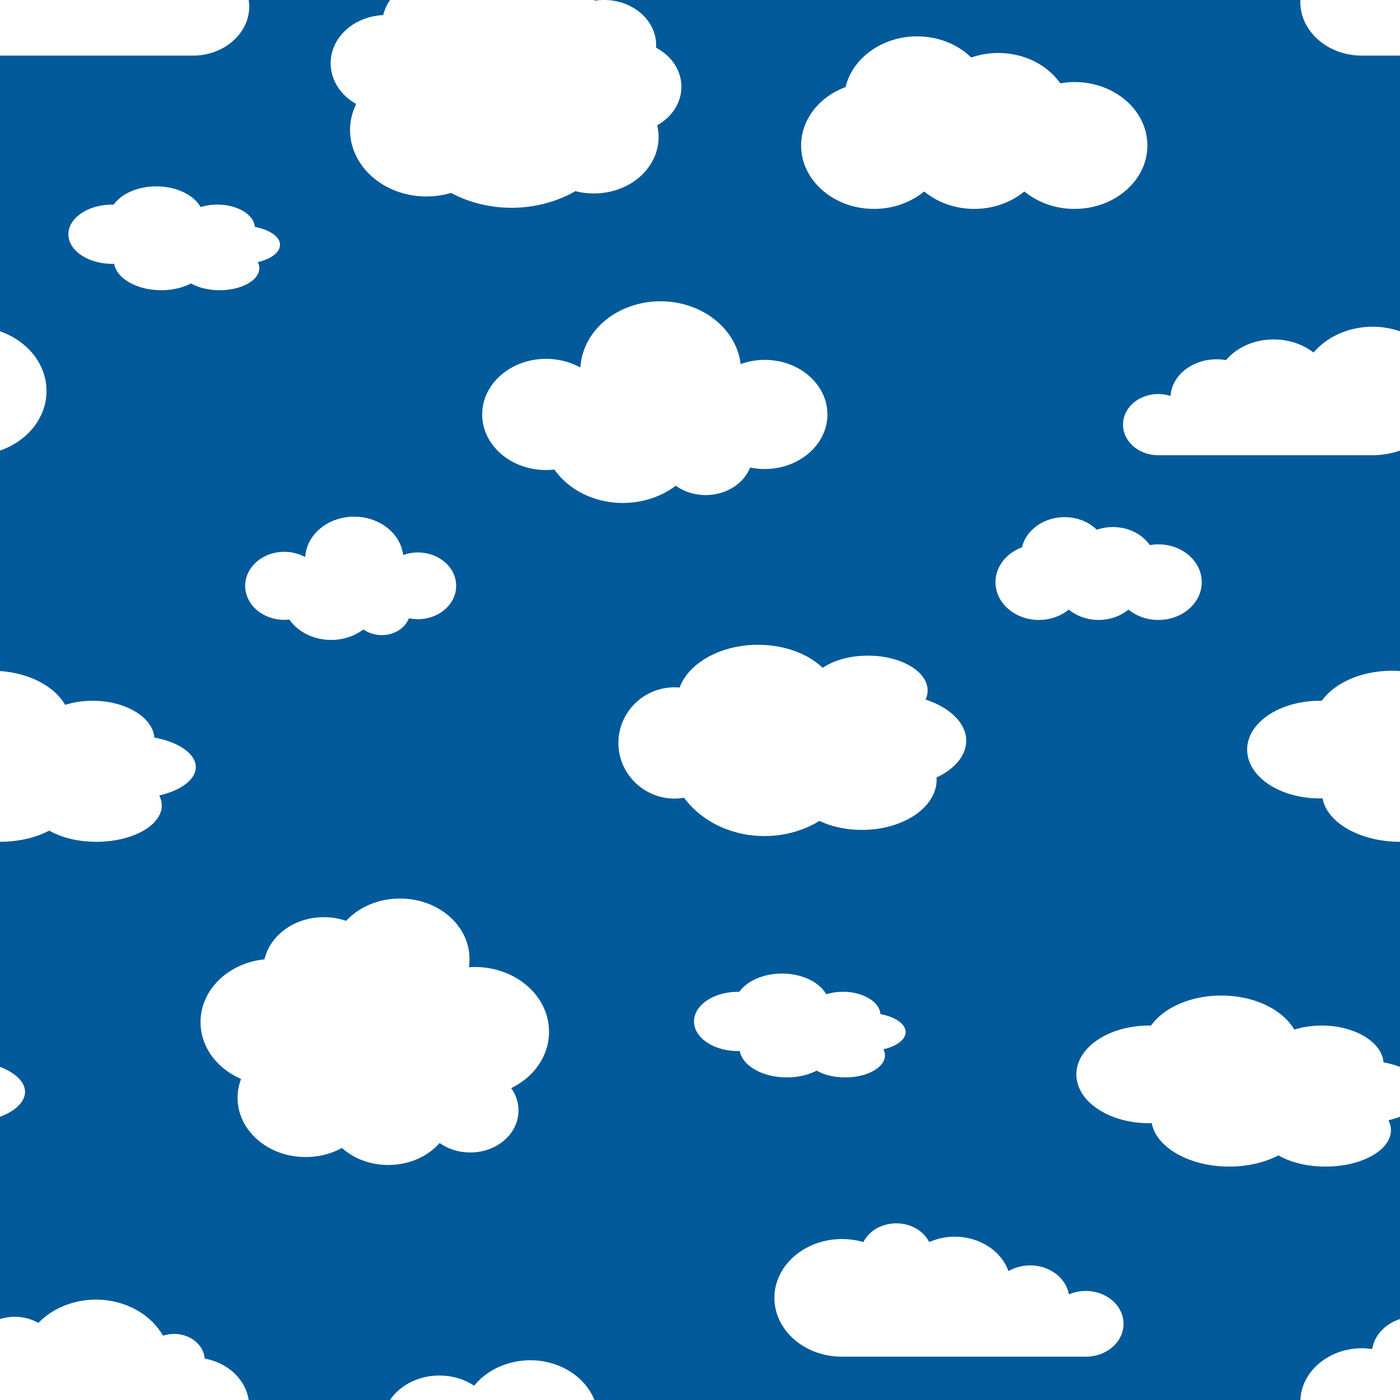 Soft White Clouds on a Light Blue Sky - PatternPictures